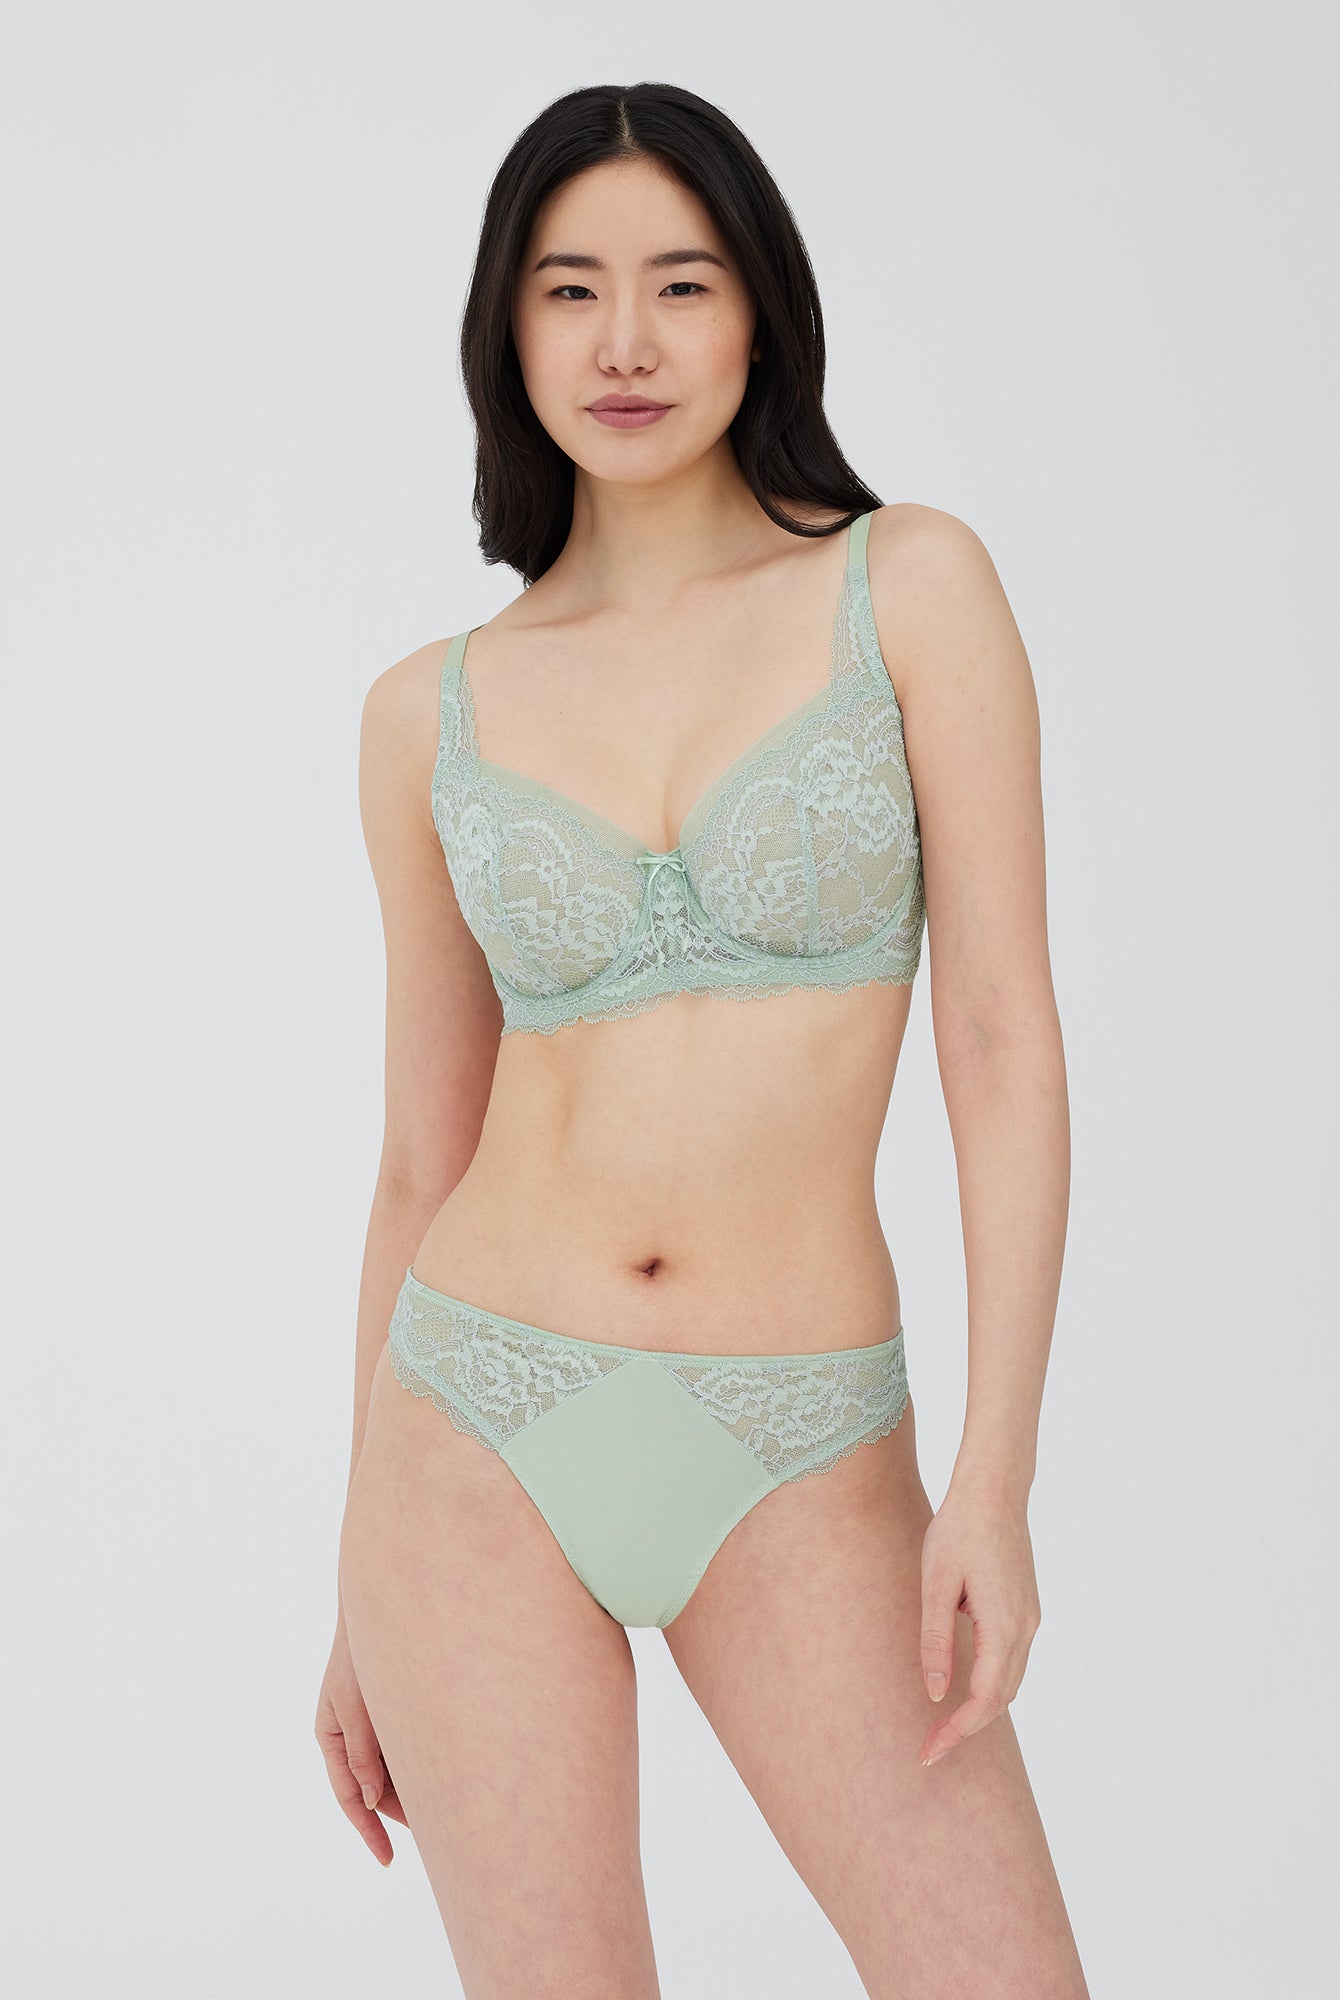 NWT Target Bra 32D Green English Teal Balconette Unlined Lace Interior Sling  - AbuMaizar Dental Roots Clinic